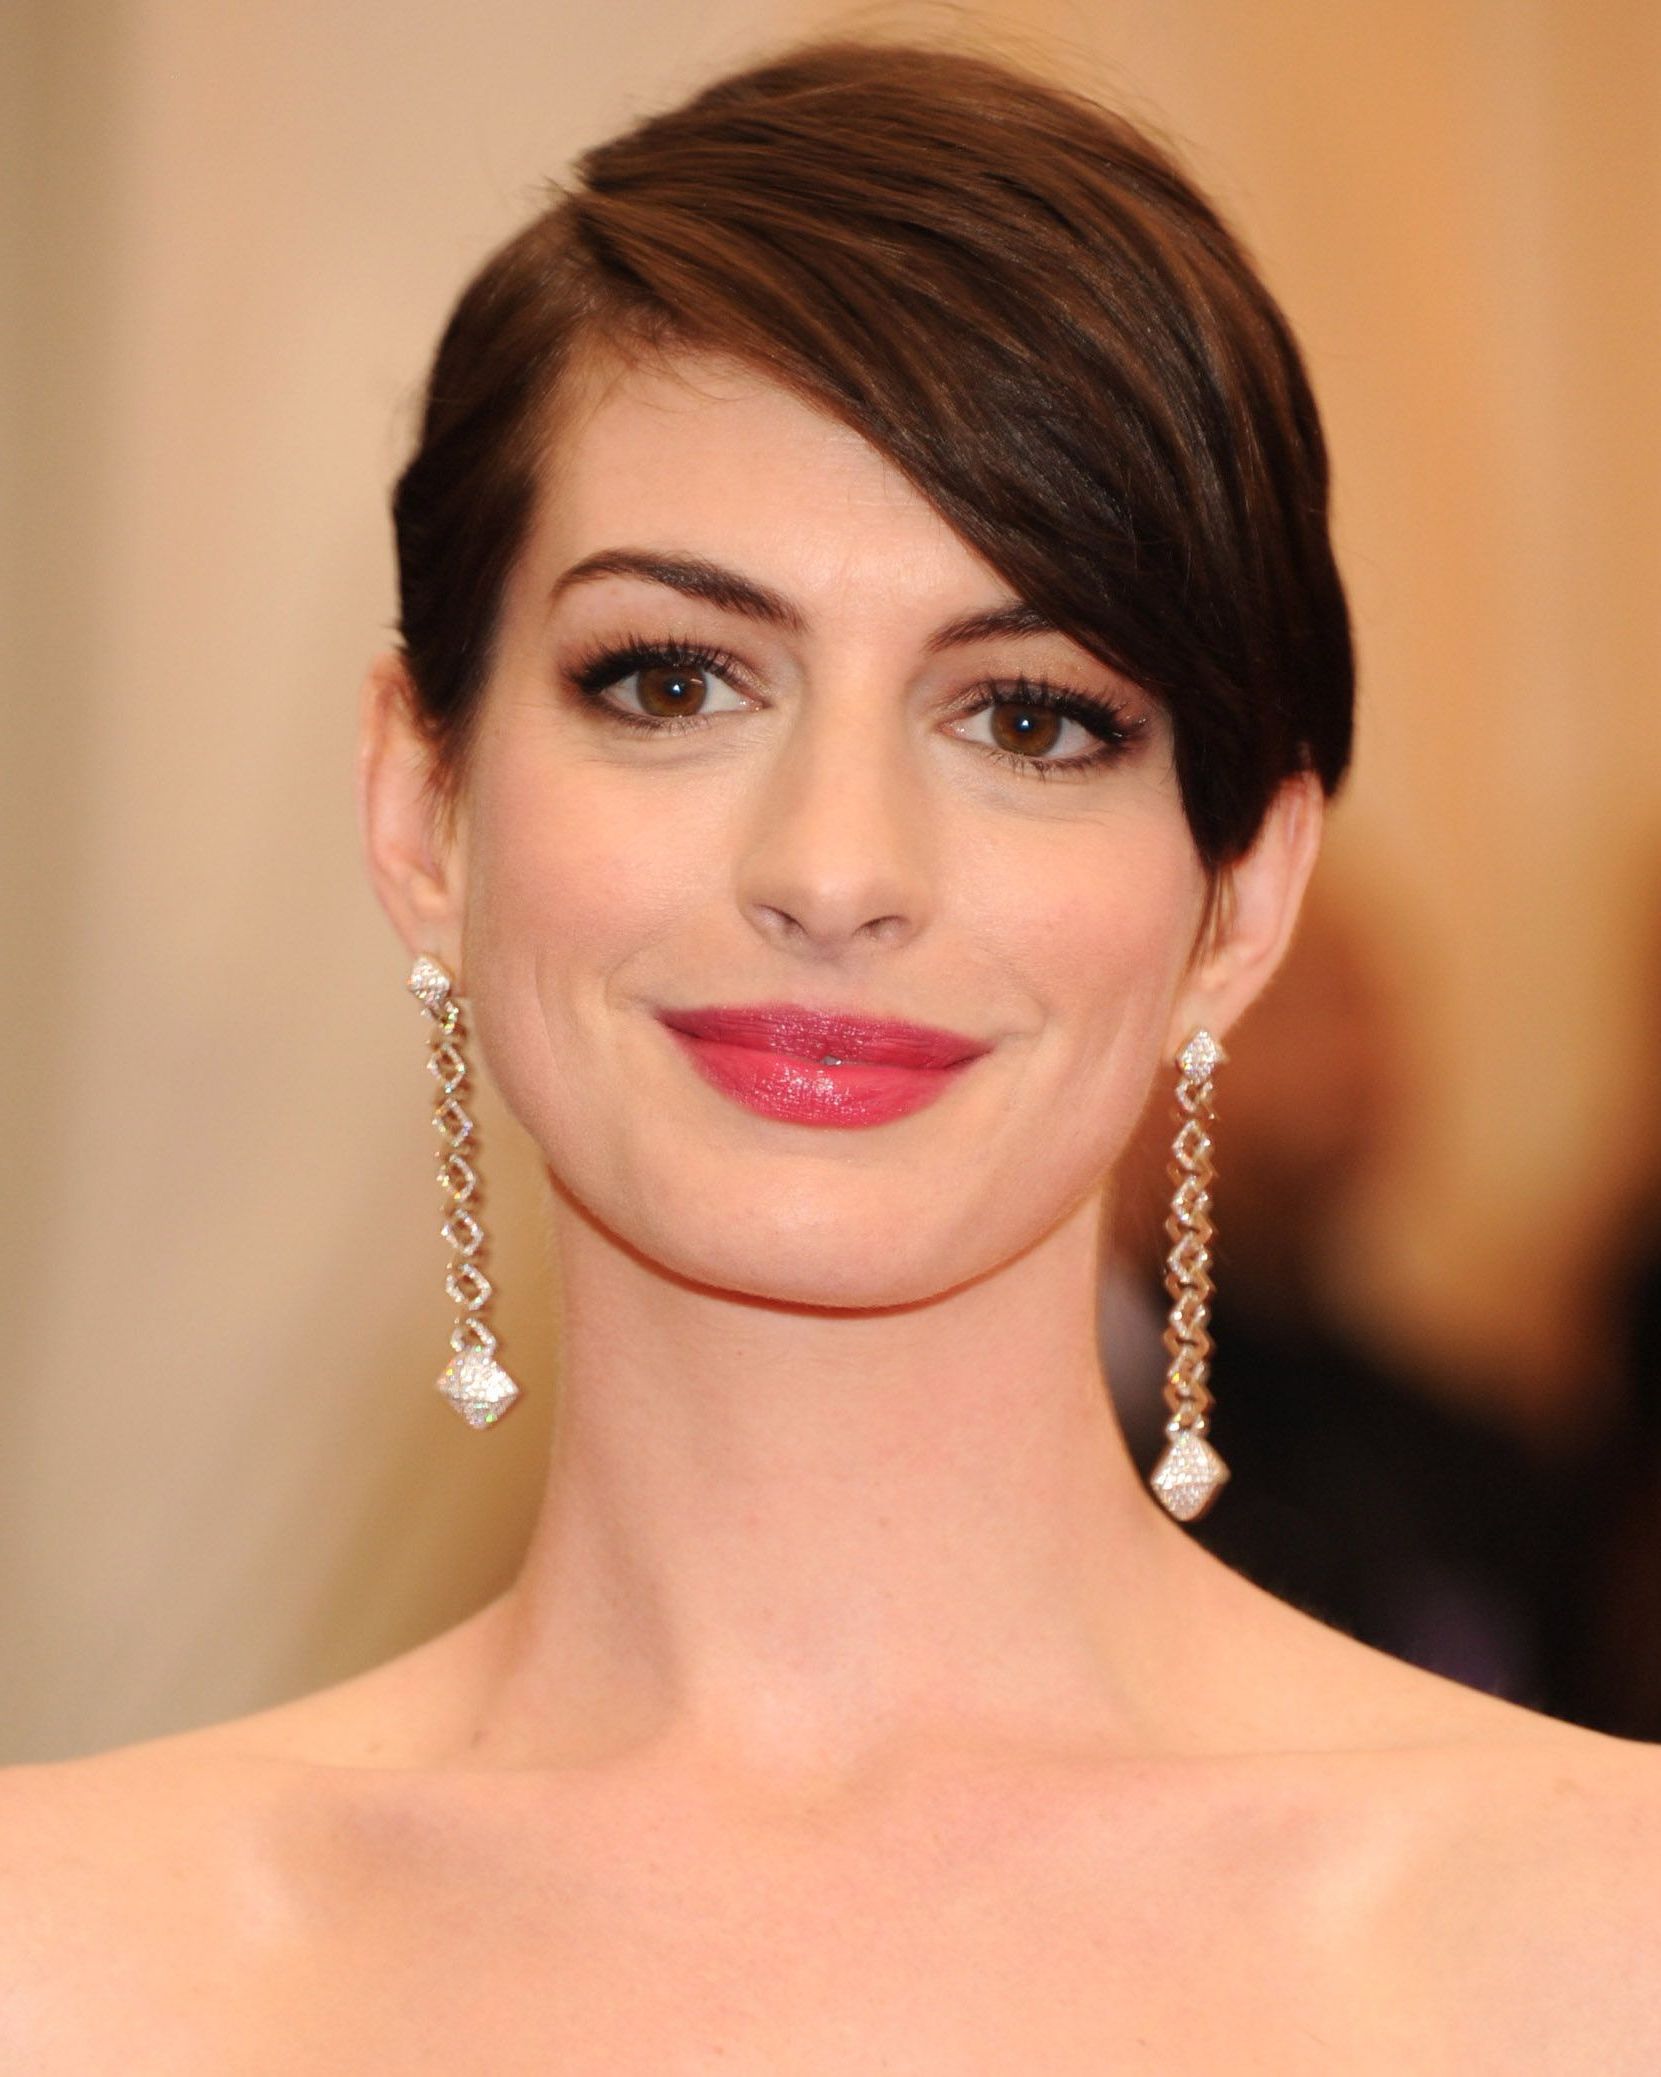 32 Best Short Hair Styles – Bobs, Pixie Cuts, And More Celebrity Throughout Dinner Short Hairstyles (View 22 of 25)